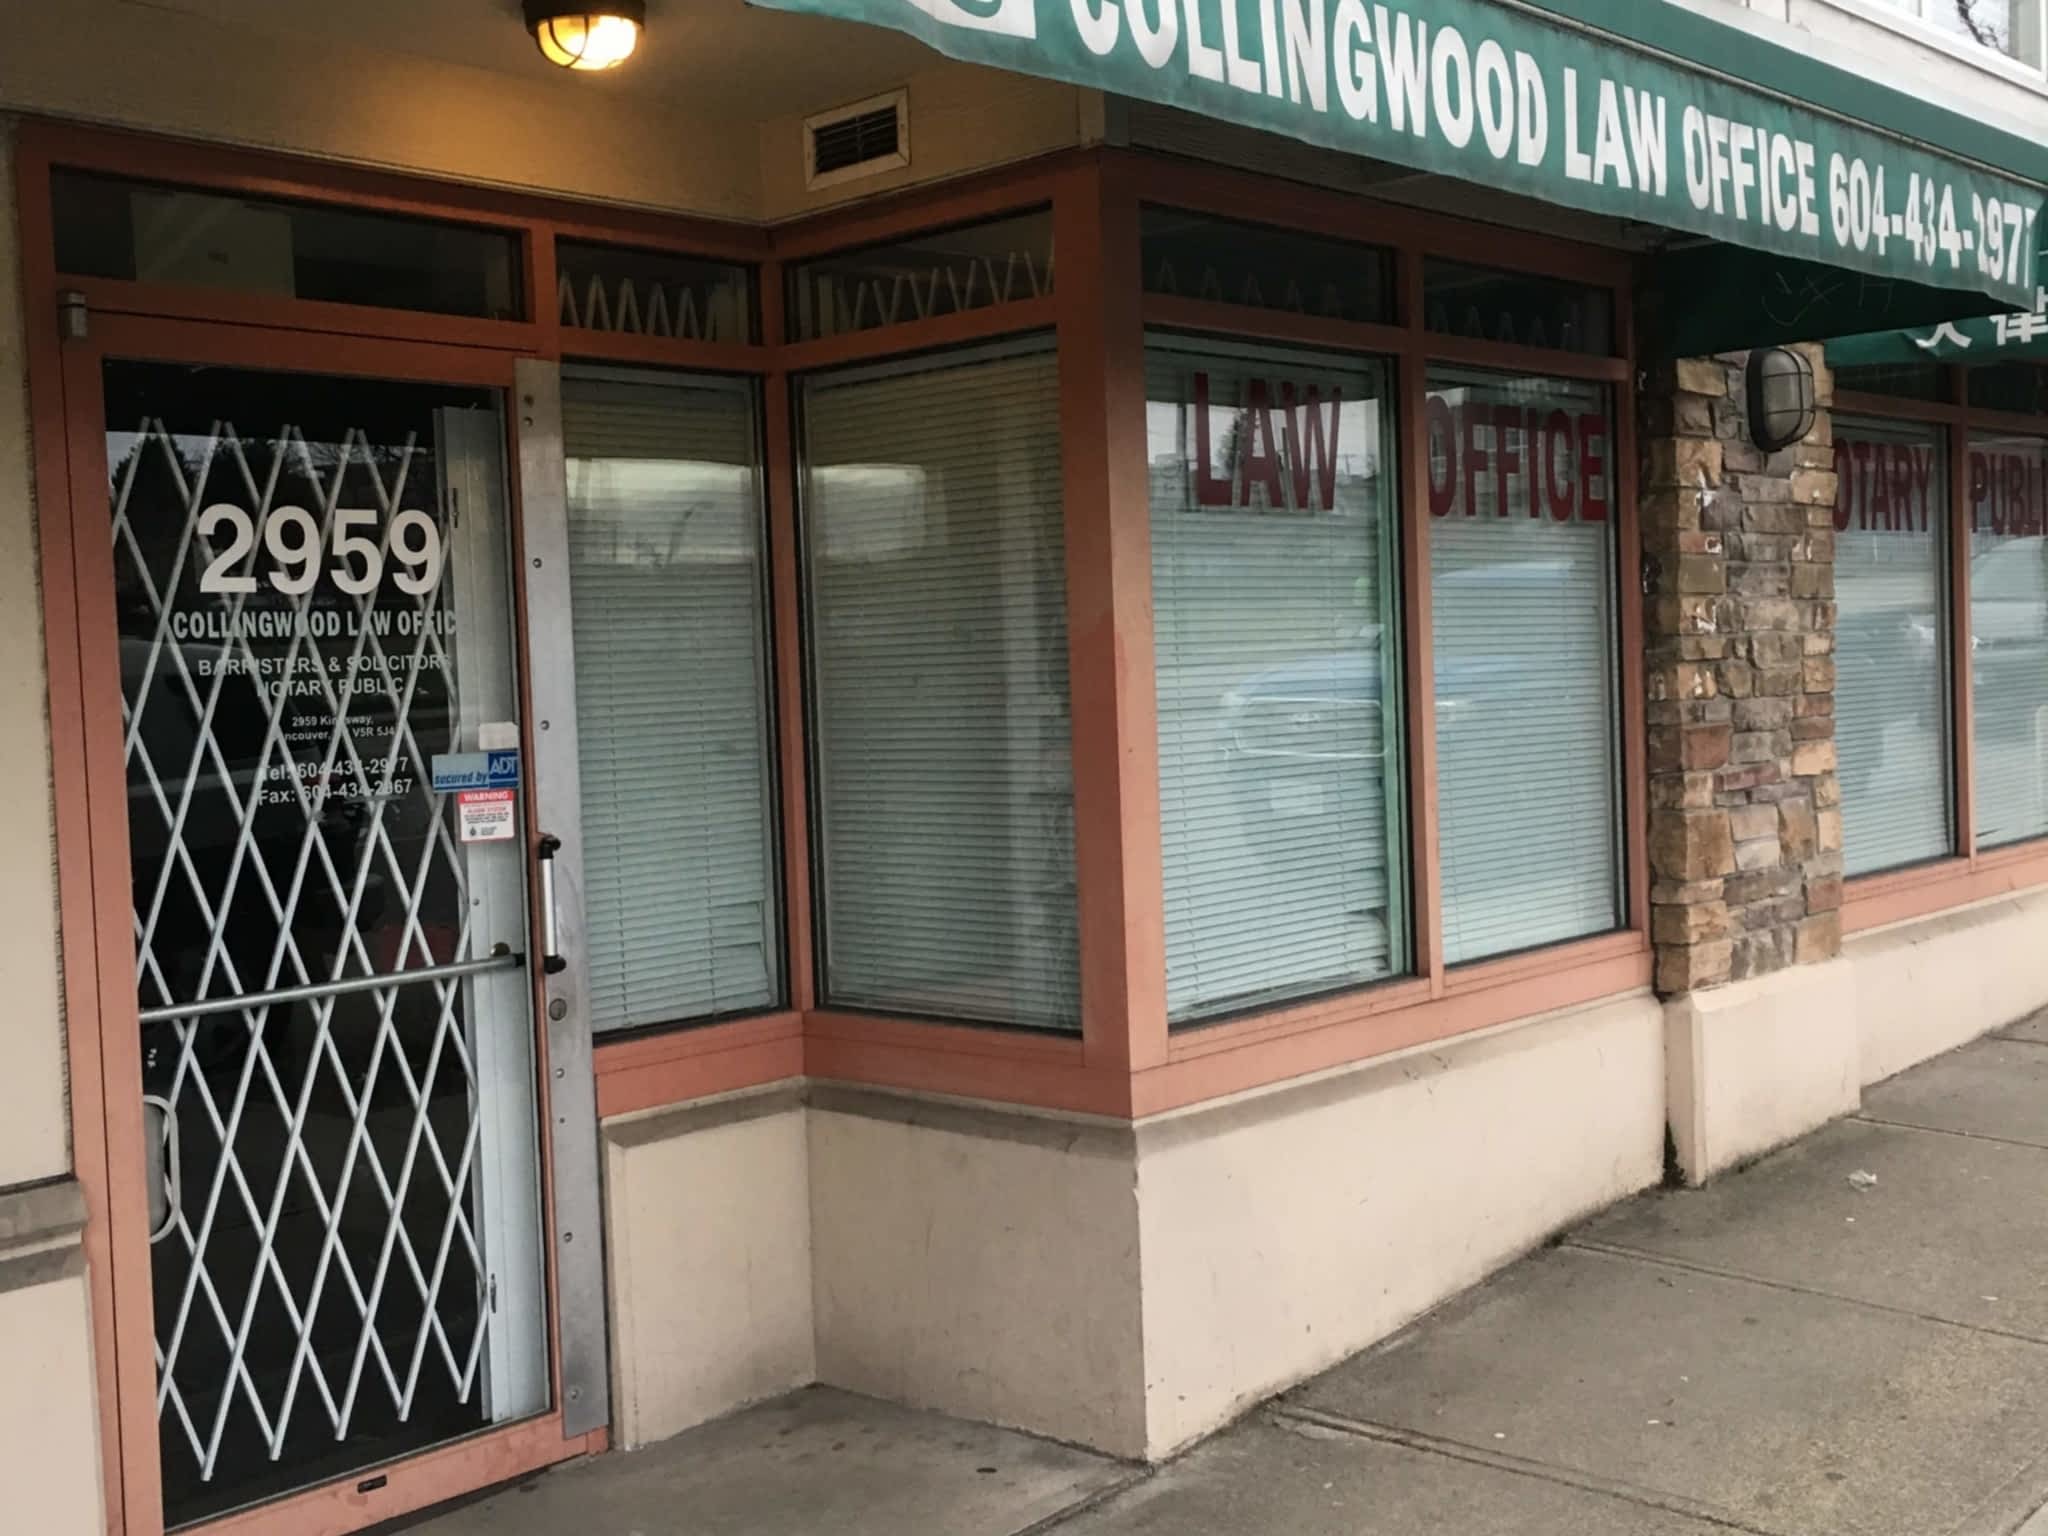 photo Collingwood Law Office